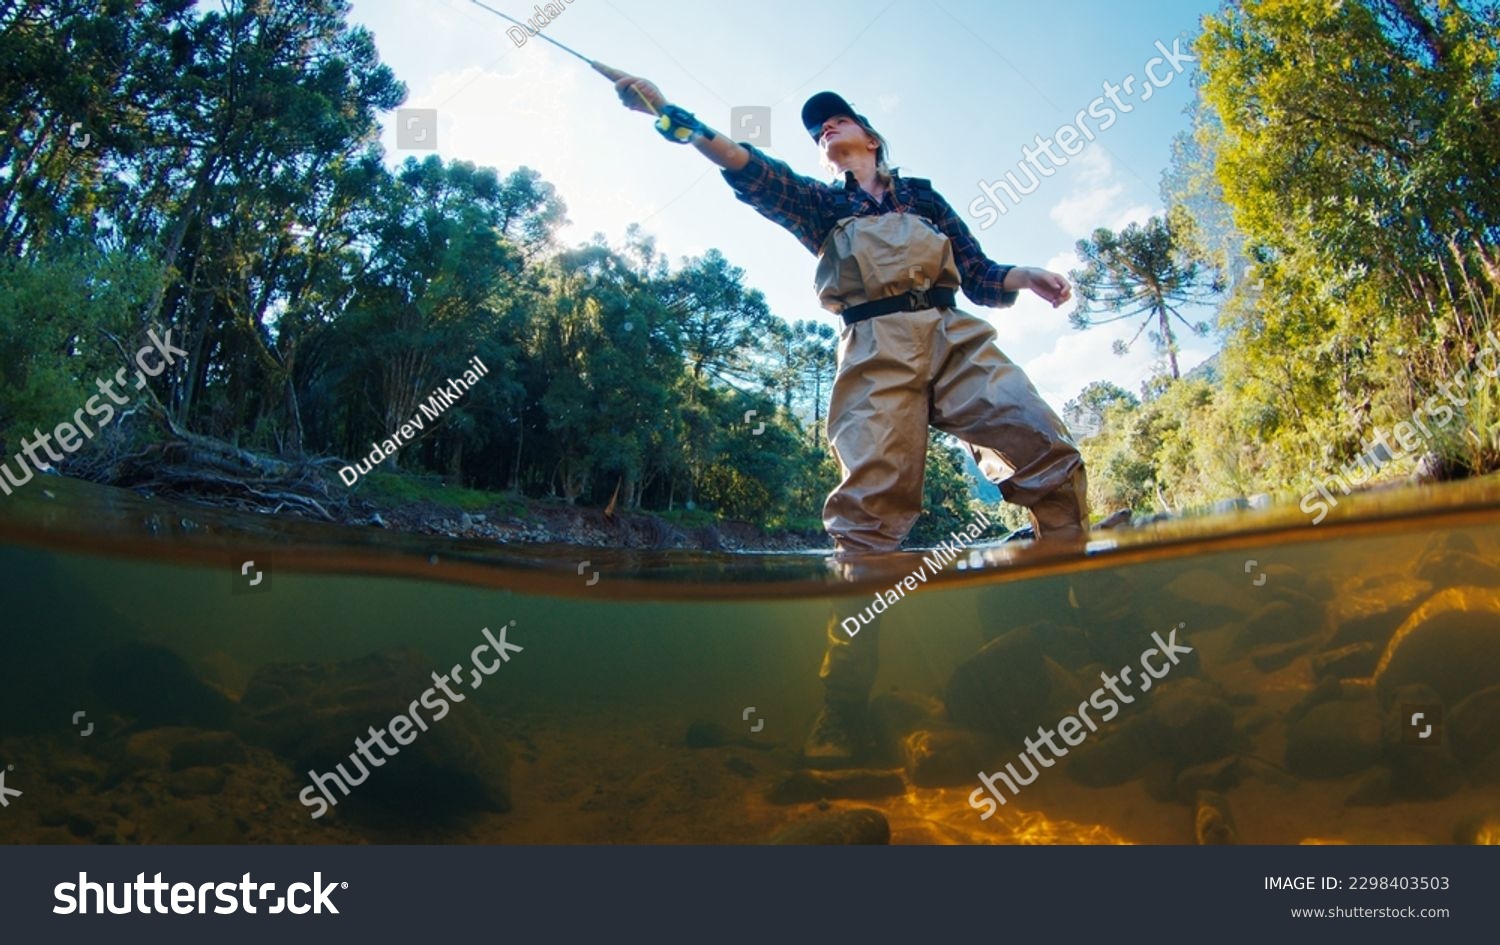 Woman angler on the river. Woman stands in the water in waders and casts the line. Woman fishing on the river #2298403503